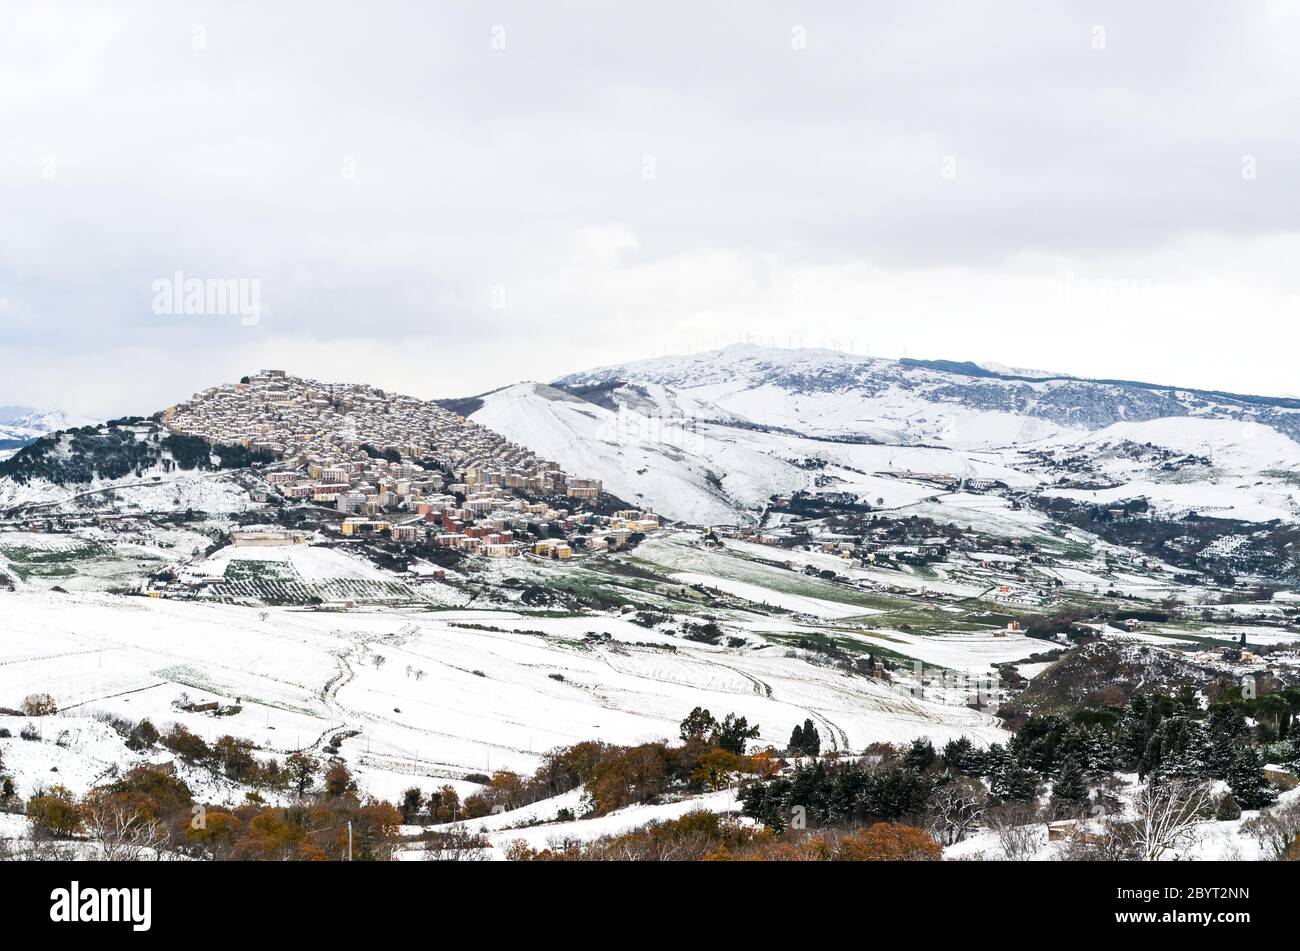 Winter landscape with snow over Gangi and Geraci Siculo in the mountains near Catania, Sicily, Italy Stock Photo